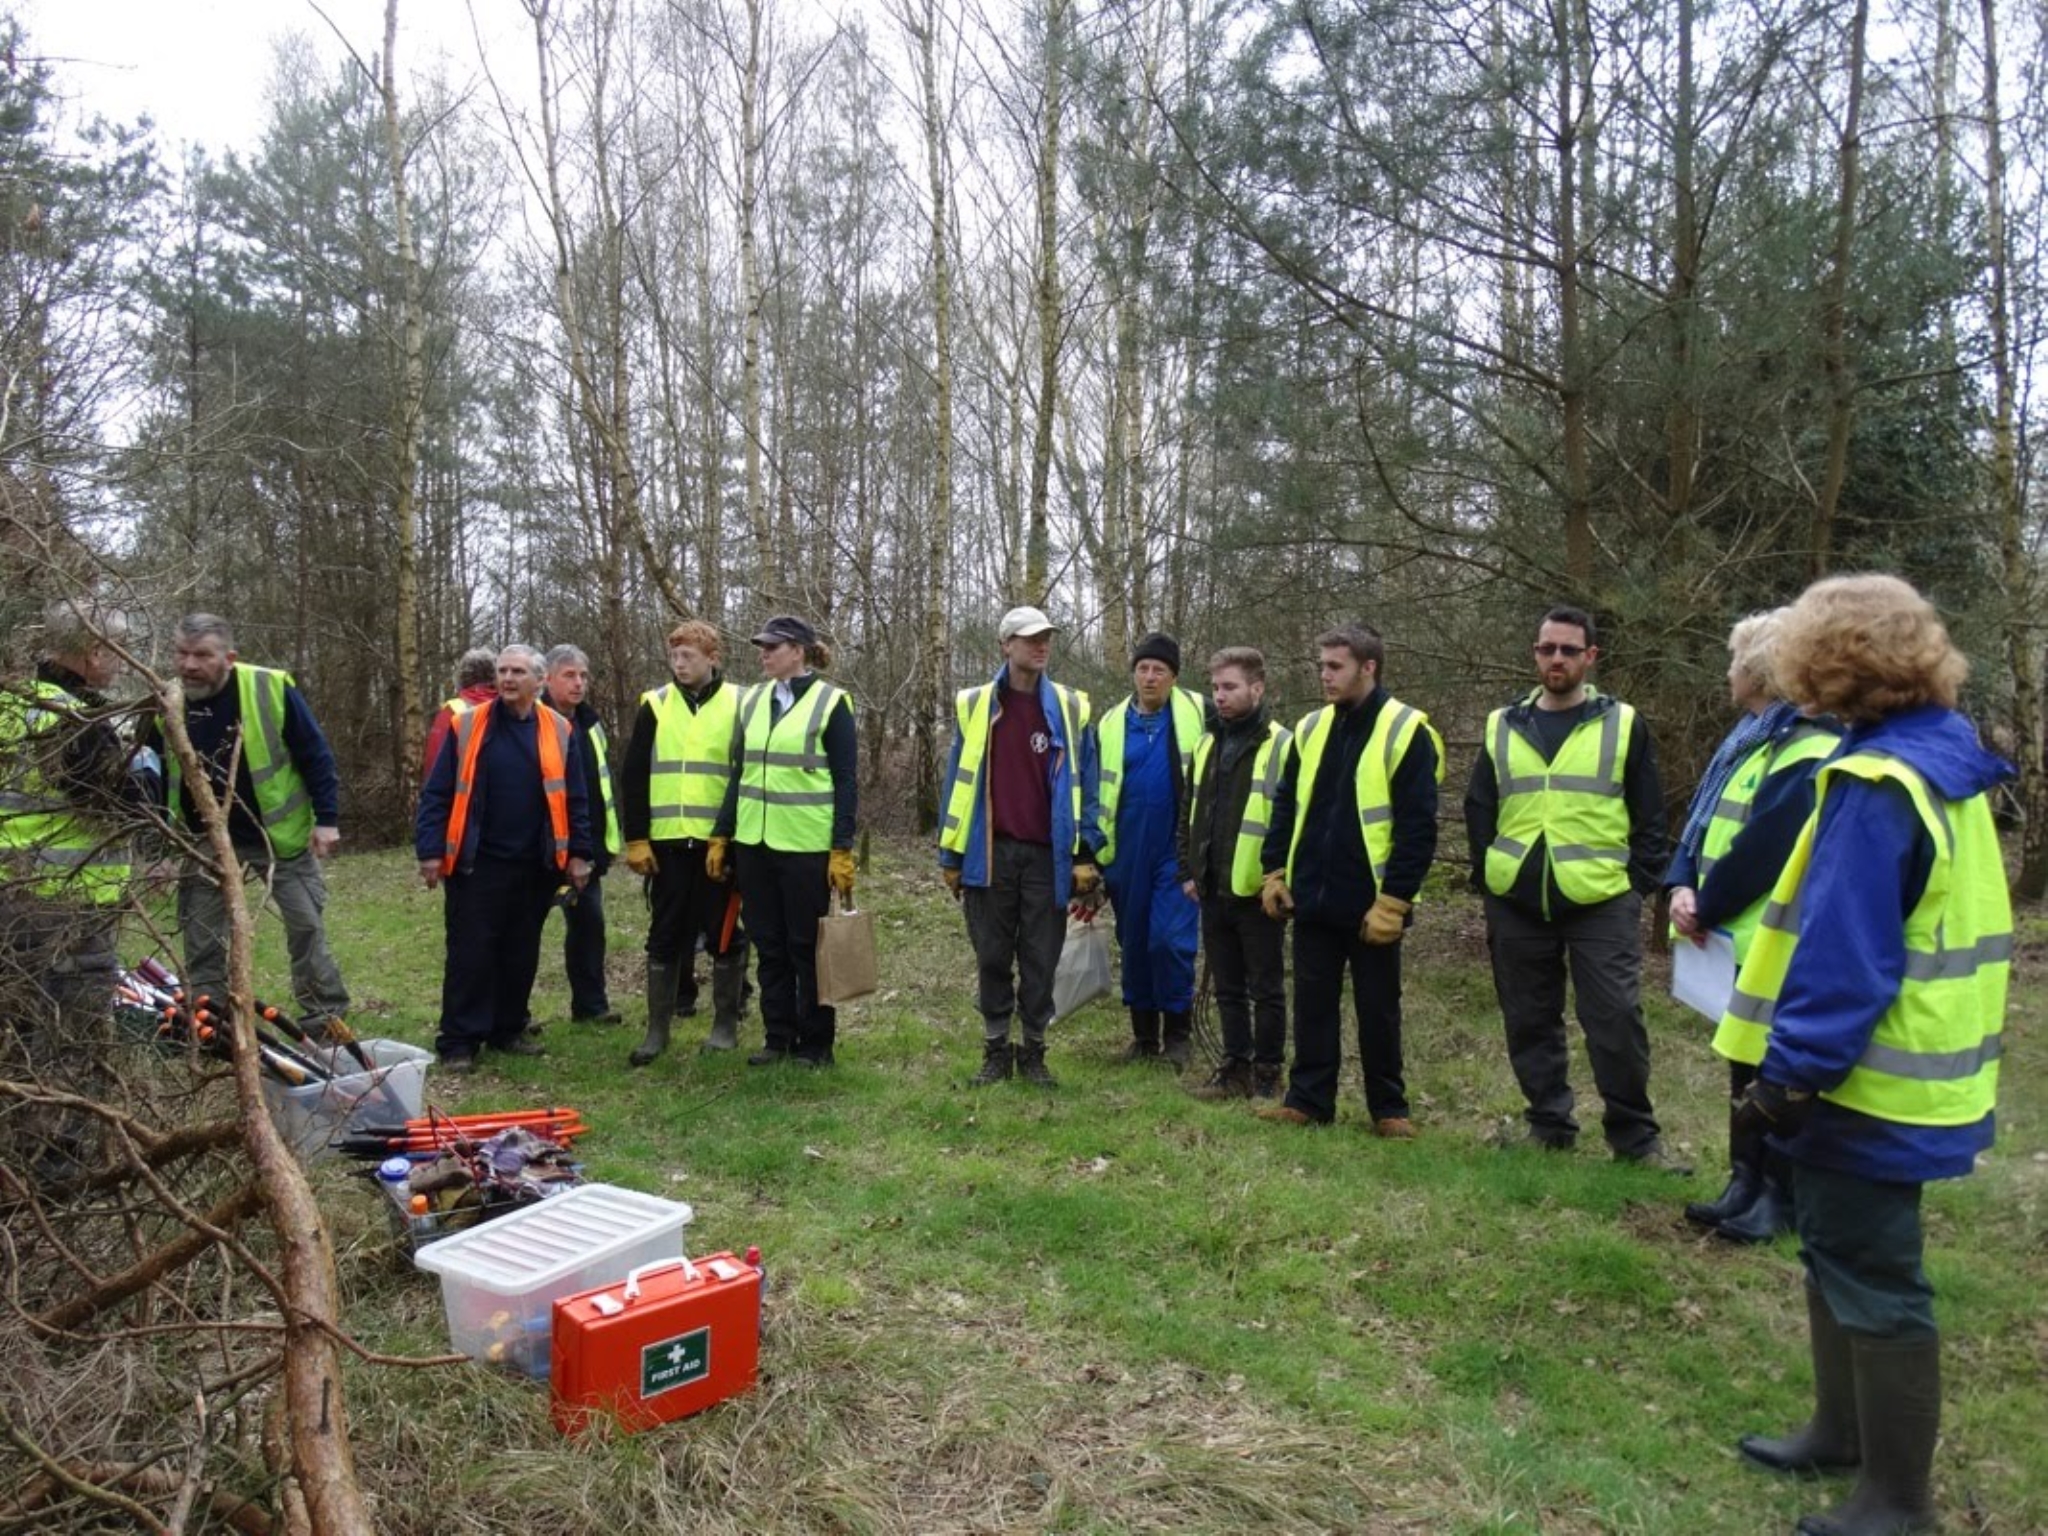 A photo from the FoTF Conservation Event - April 2018 - Improving habitat at High Lodge : Volunteers gather for a briefing